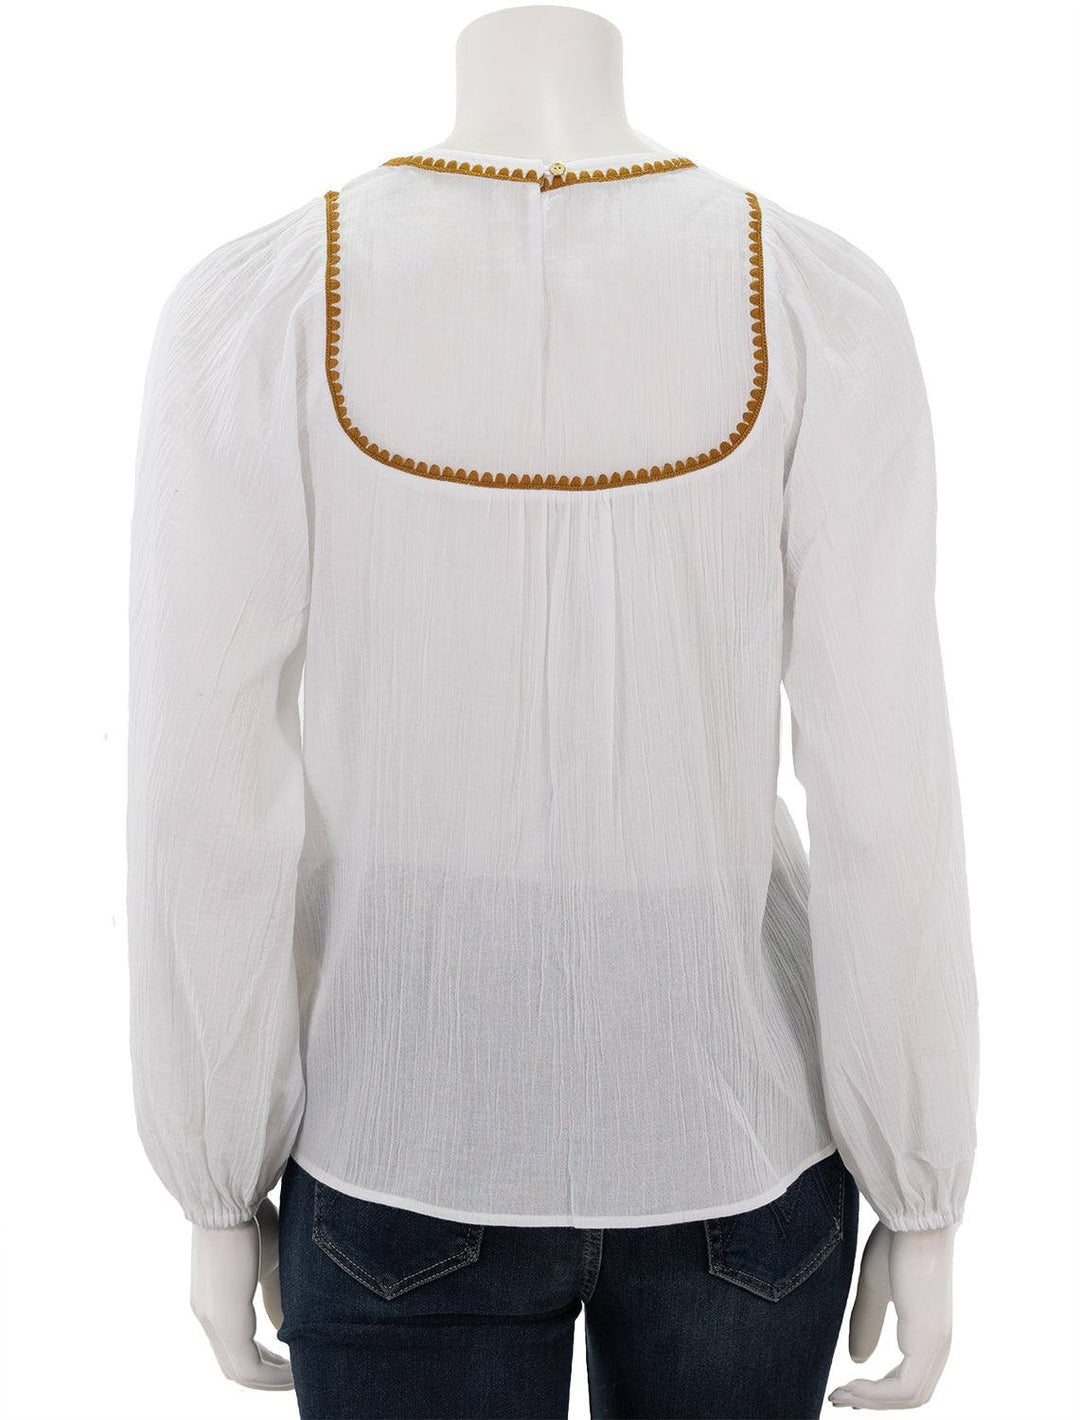 Back view of Scotch & Soda's white patchwork bib blouse with embroidery.